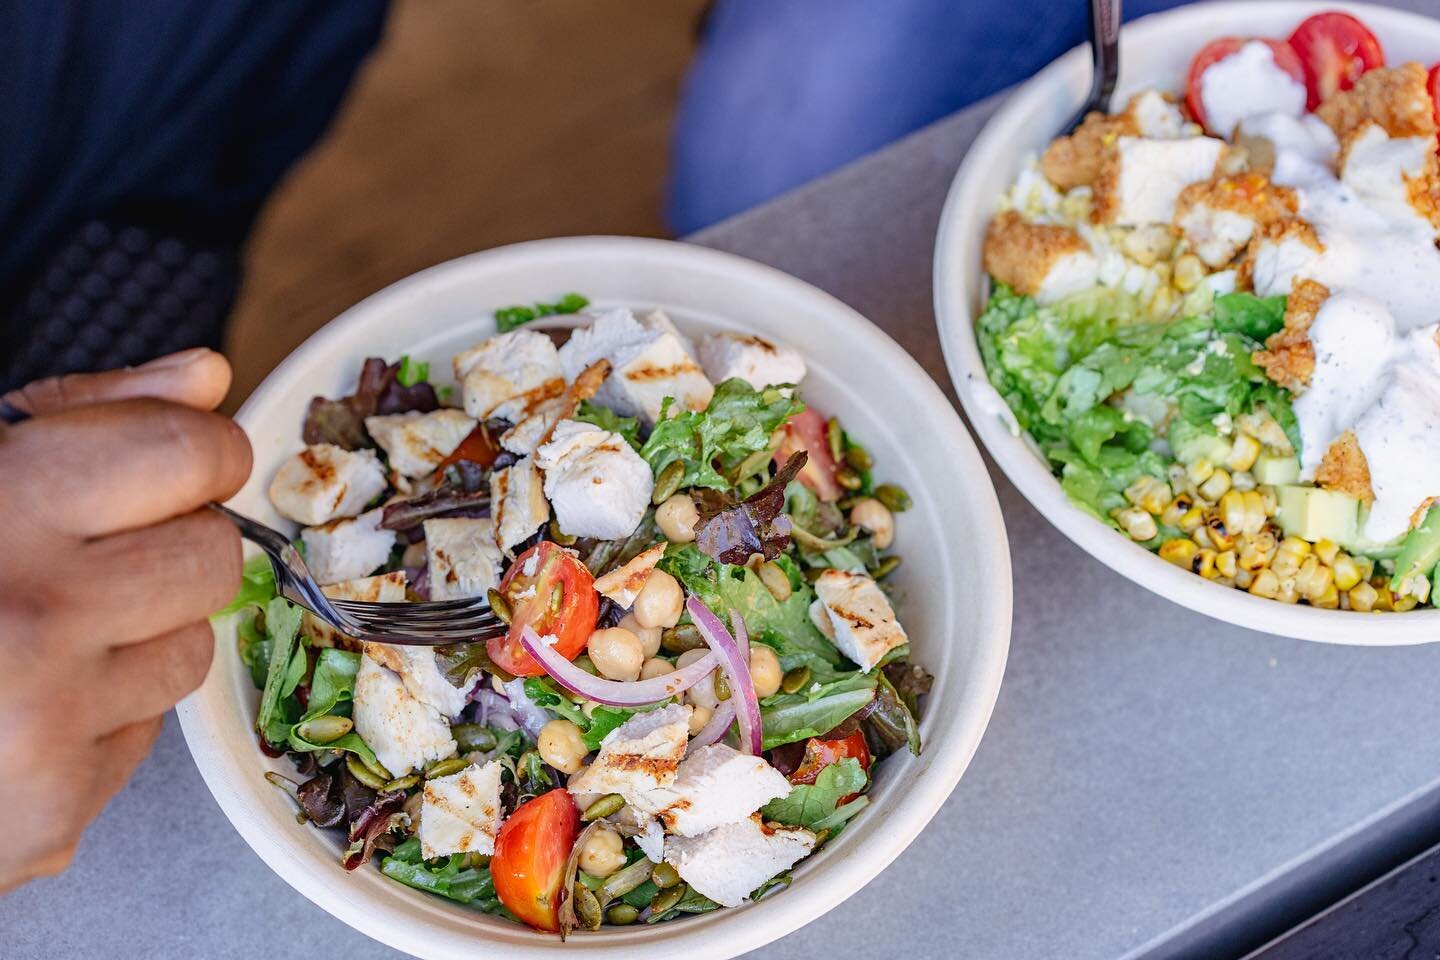 Move over chicken sandos, our BOWLS are in the house and they are 🔥🔥🔥